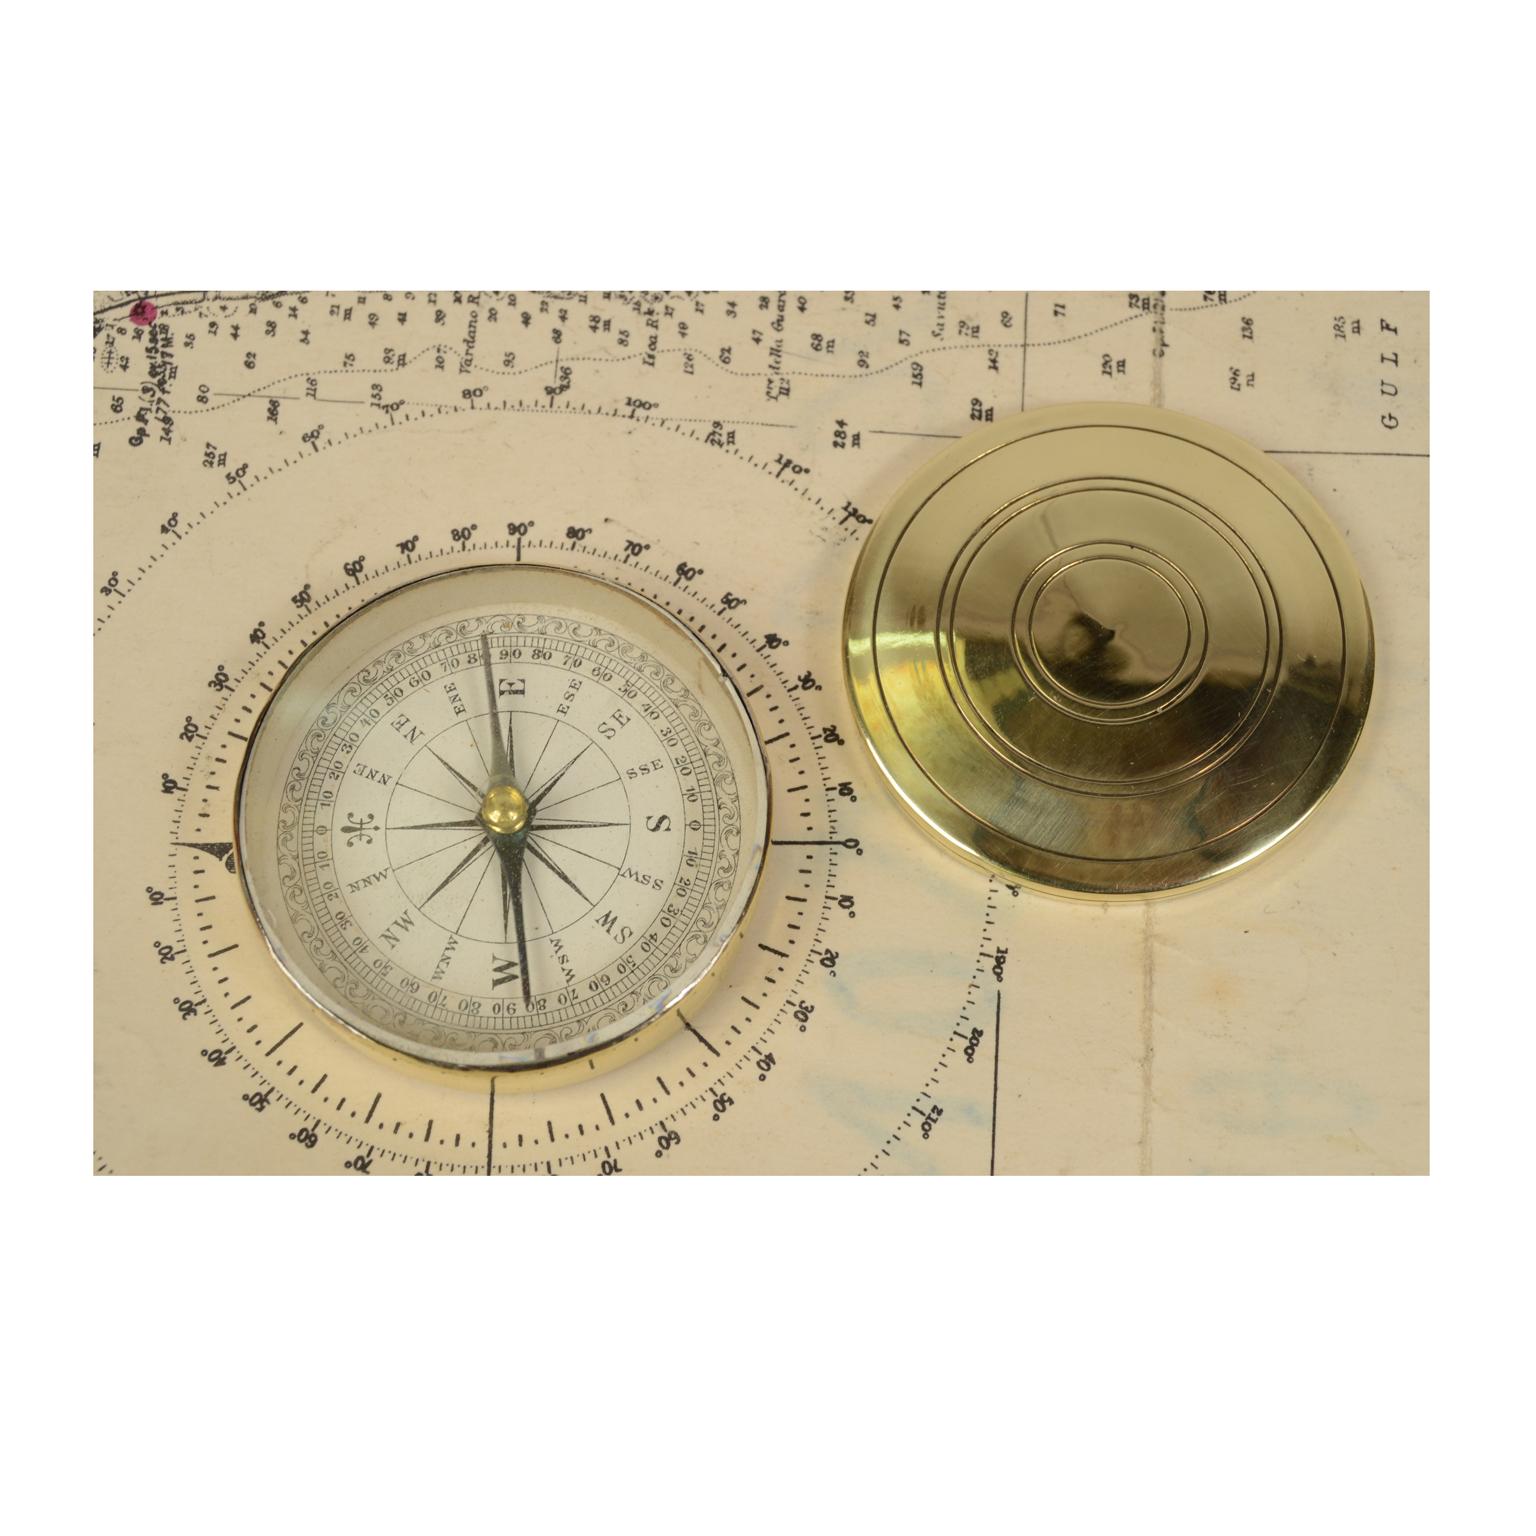 Magnetic topographer and travel compass, of turned brass, an instrument consisting of a magnetized needle free to rotate on a horizontal plane, marking the direction of magnetic north with the tip of the needle. Beautiful compass card with sixteen